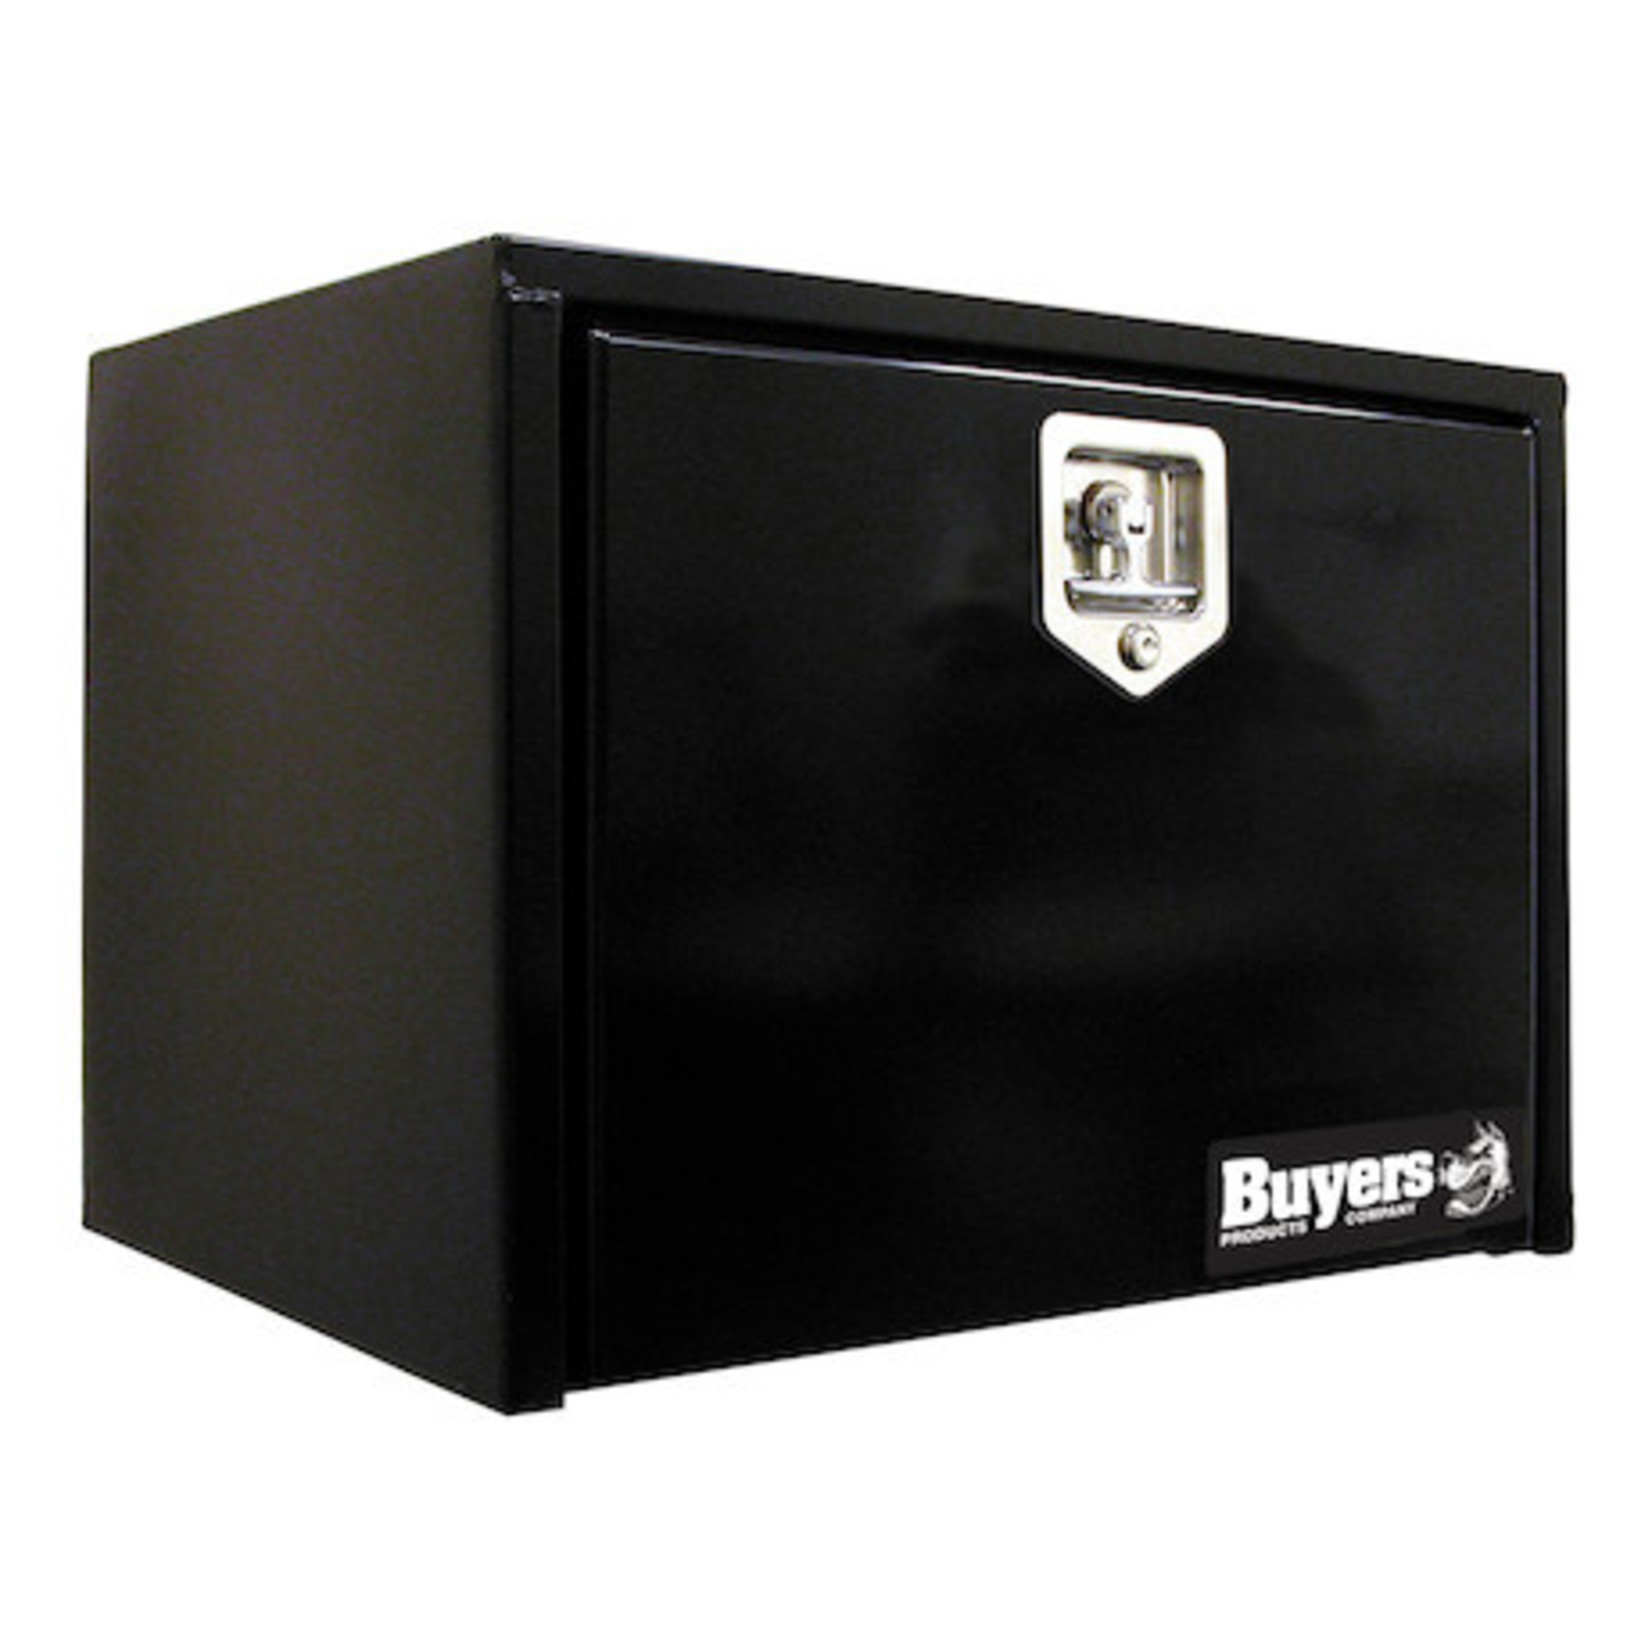 Buyers Products Company Black Steel Underbody Truck Box with T-Latch Series